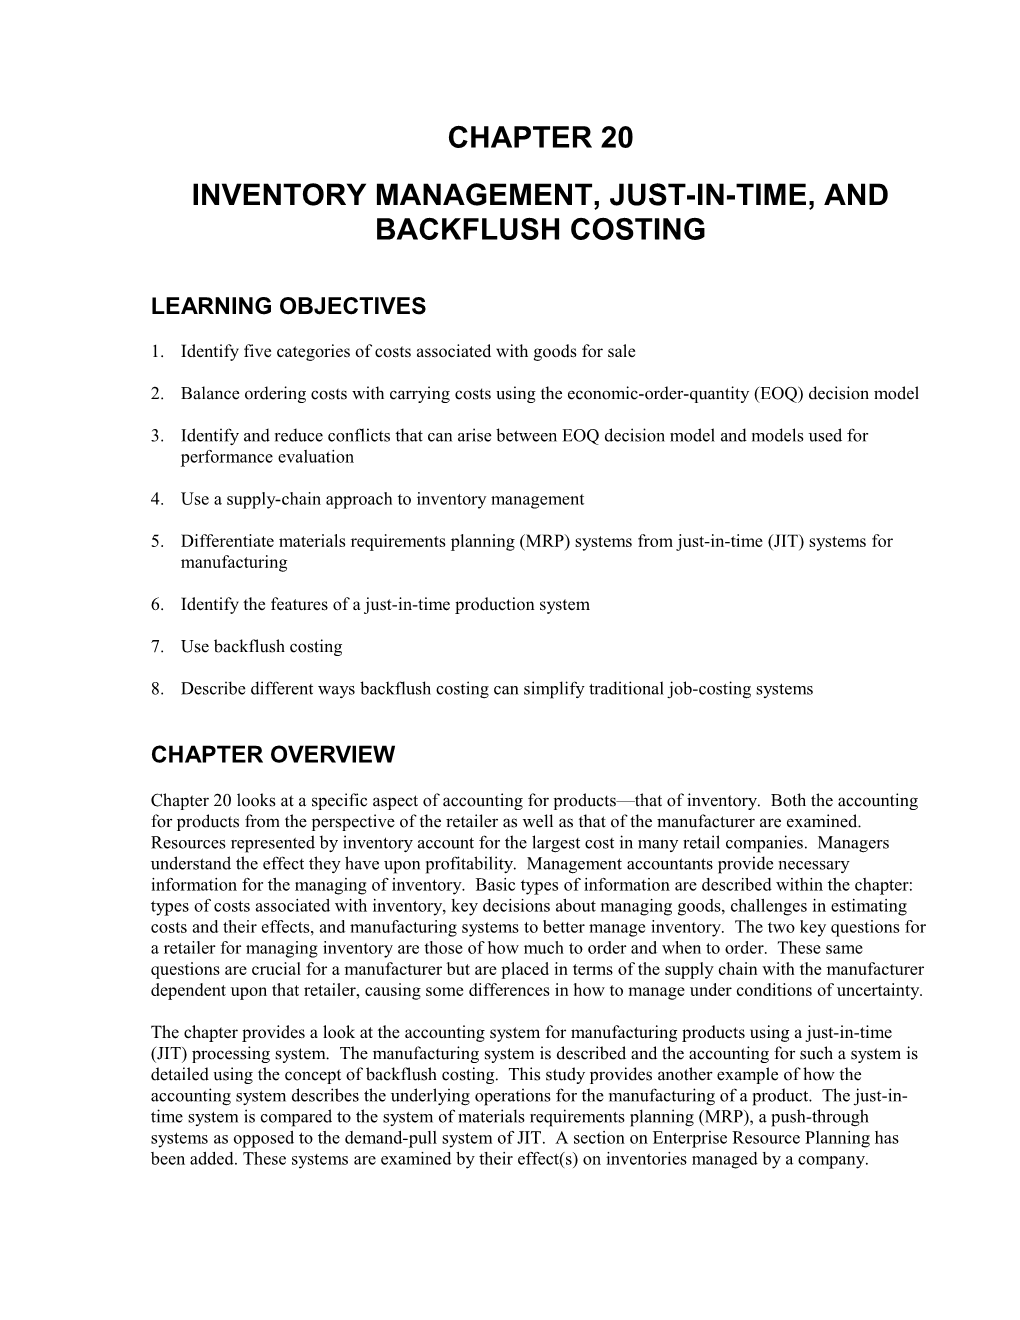 Inventory Management, Just-In-Time, and Backflush Costing